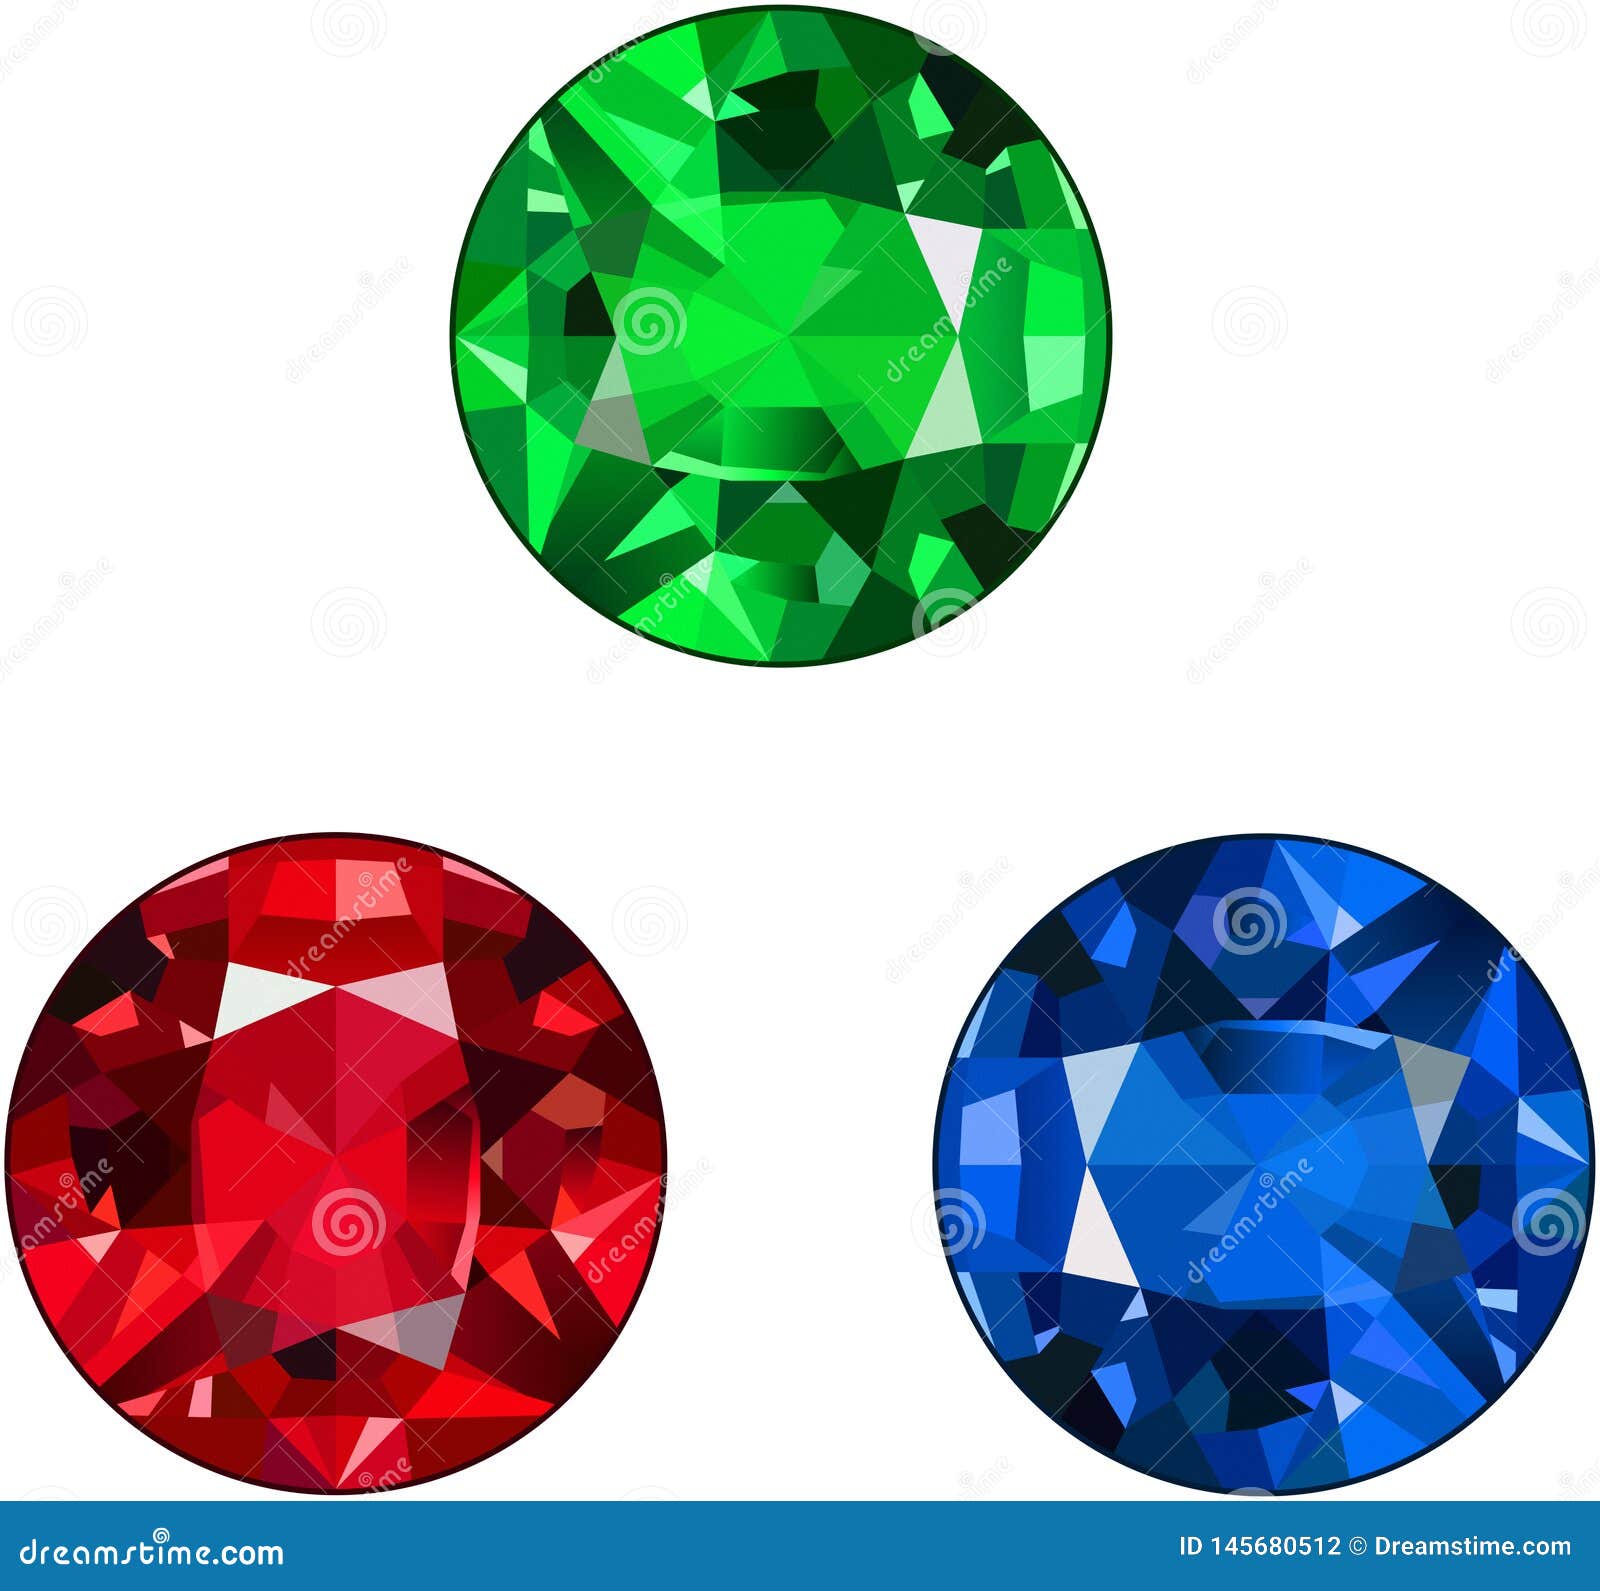 ruby and sapphire gemstones